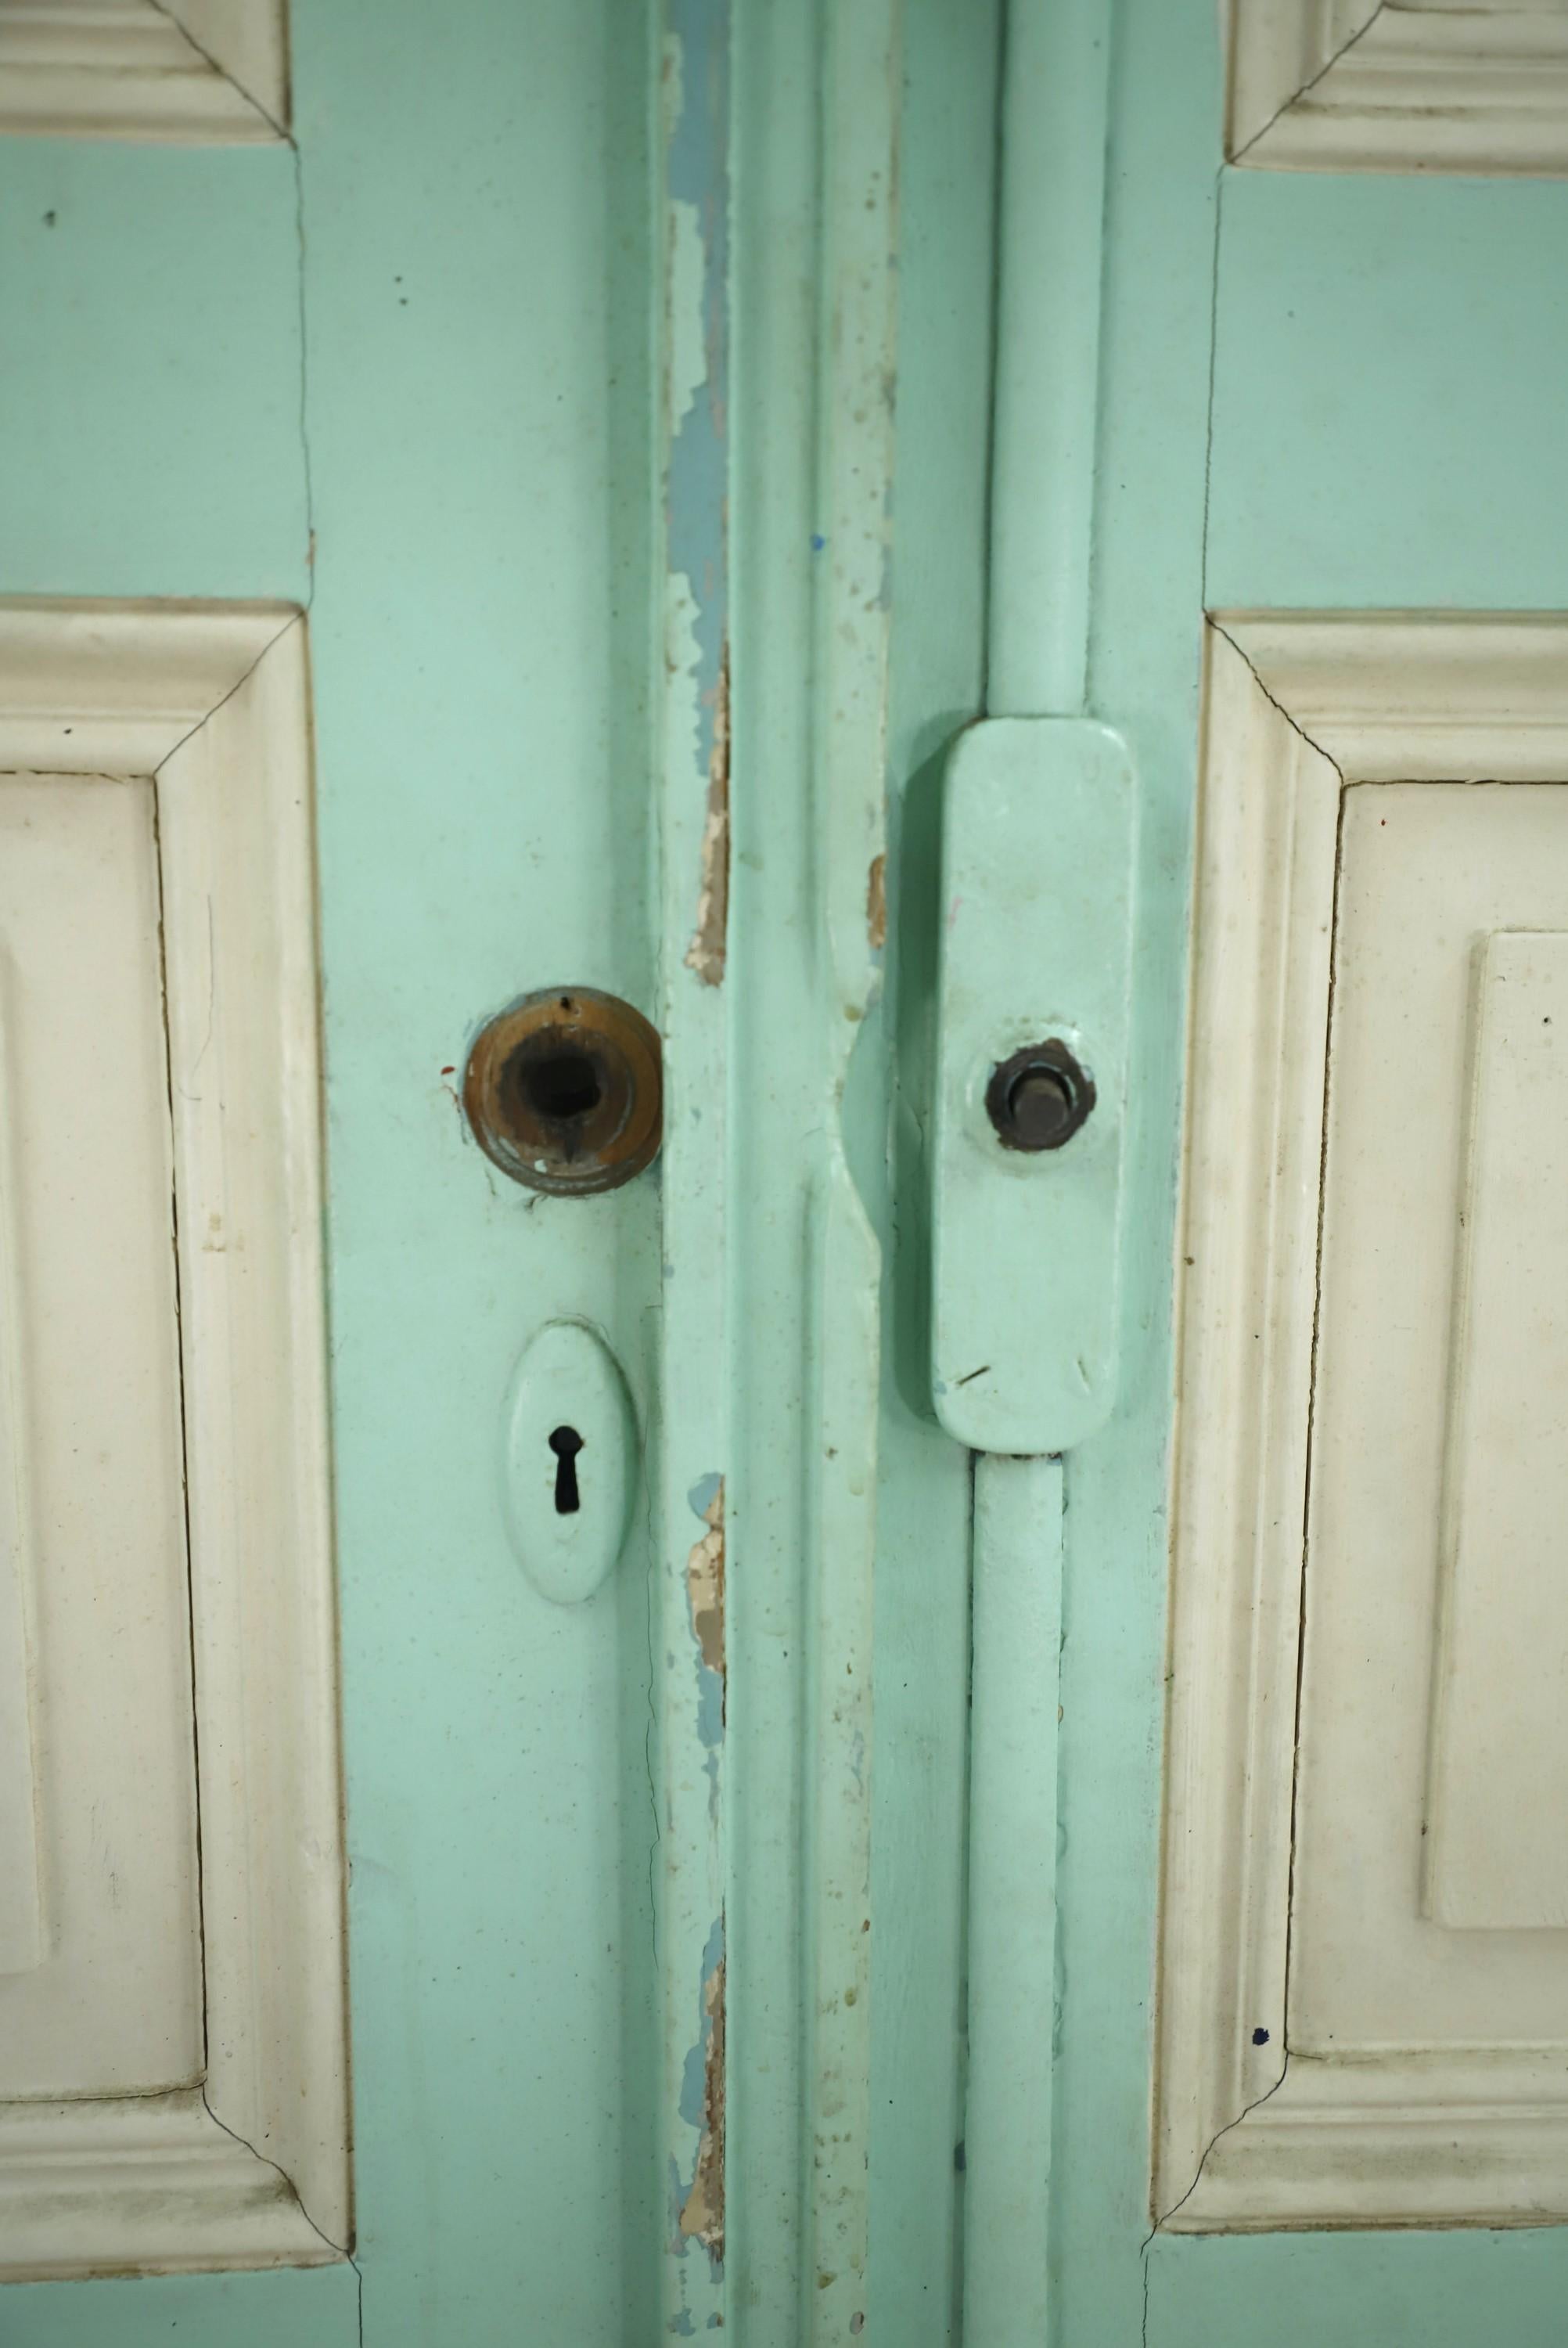 20th century pair of doors from an Argentina residence. Comes with the original teal paint. These wood doors feature three beige painted panels. Some minor chips in the wood and surface wear. Some original hardware included. Please see images.